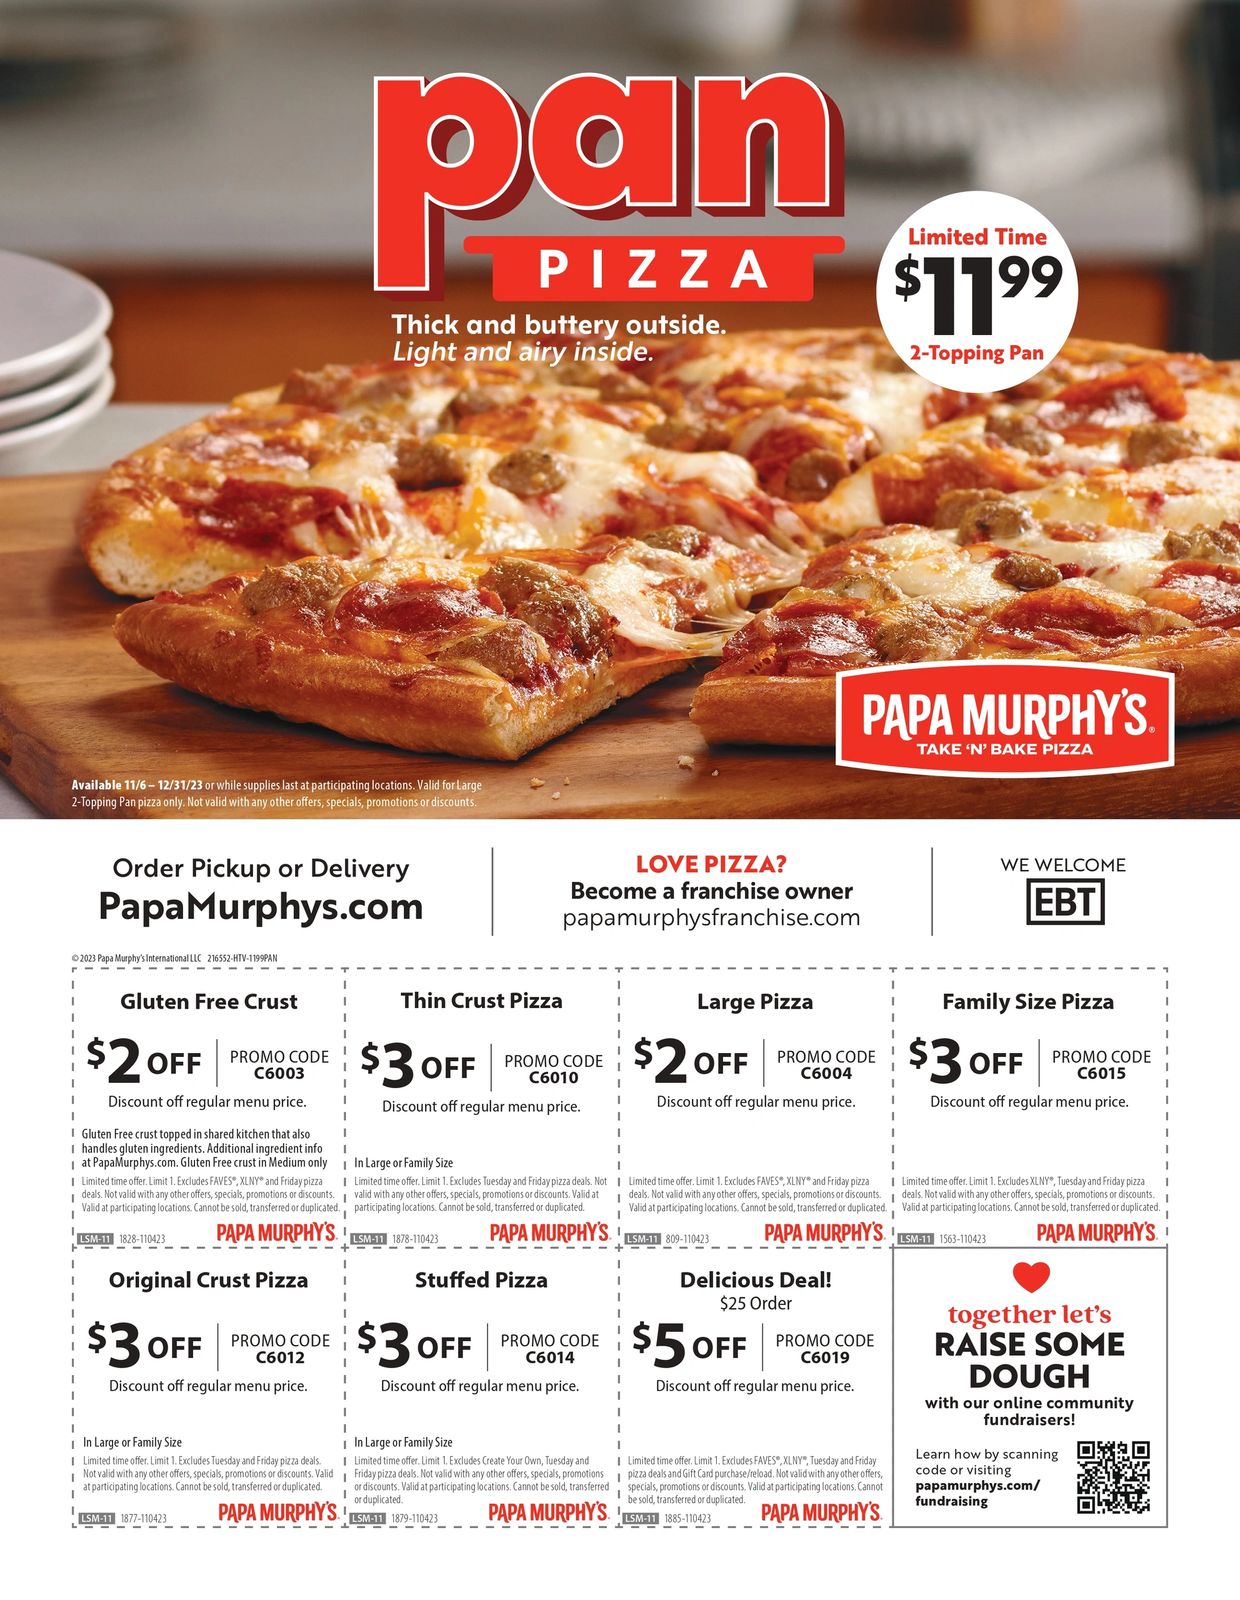 Papa Murphy's Pan Pizza!

Only $11.99 for a 2-Topping Pan Pizza for a limited time!